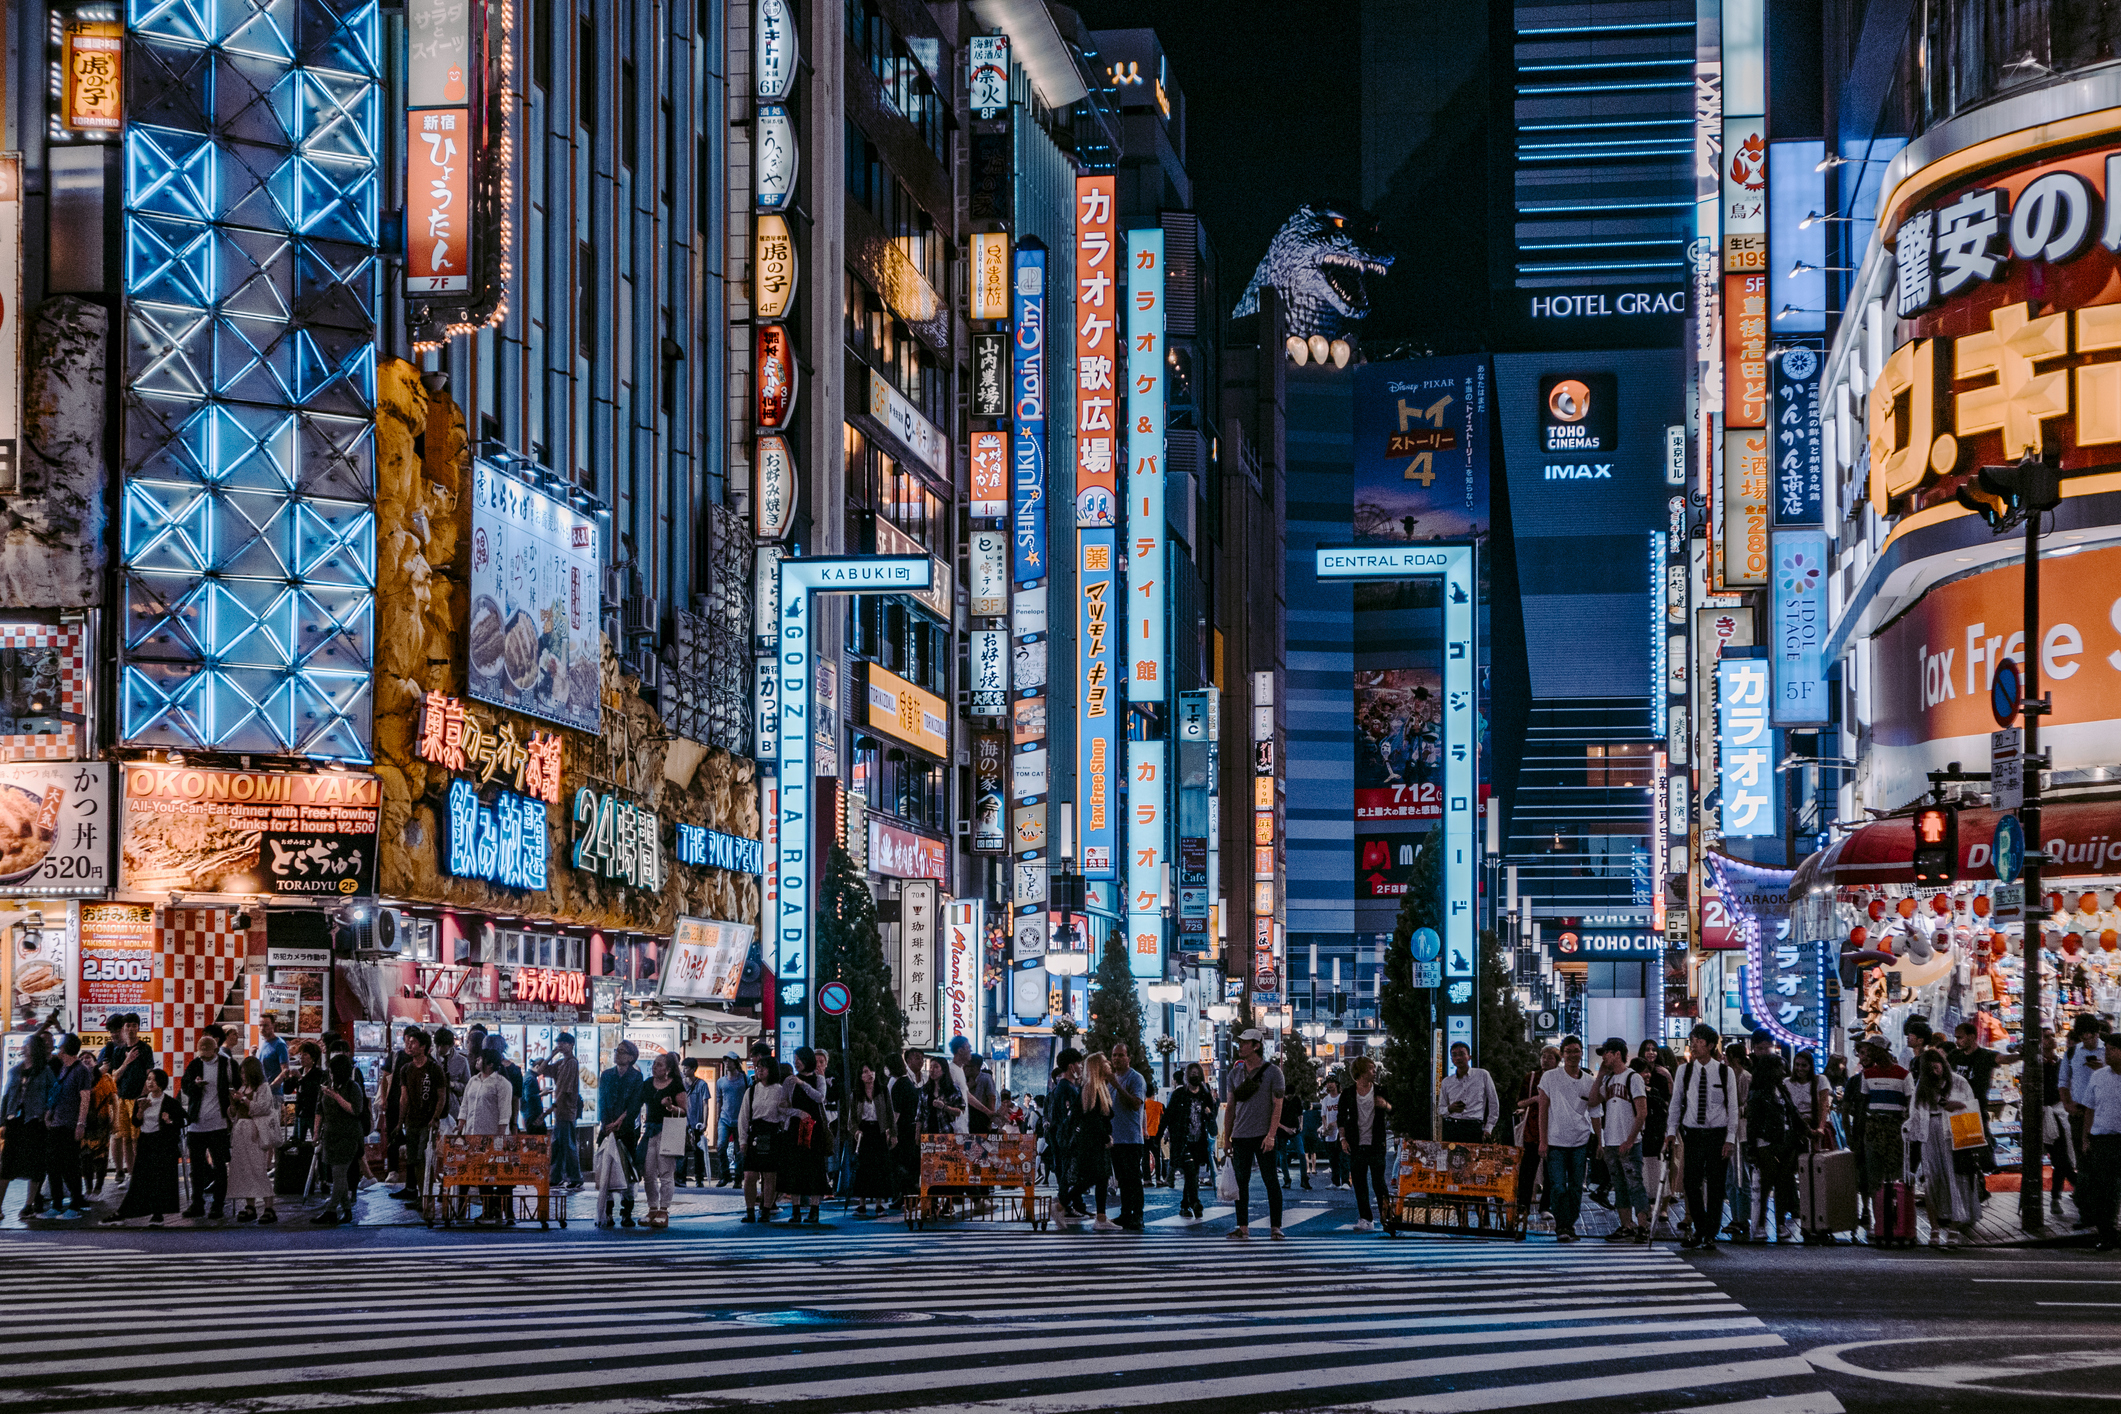 Crowded city street at night with neon signs and pedestrians crossing